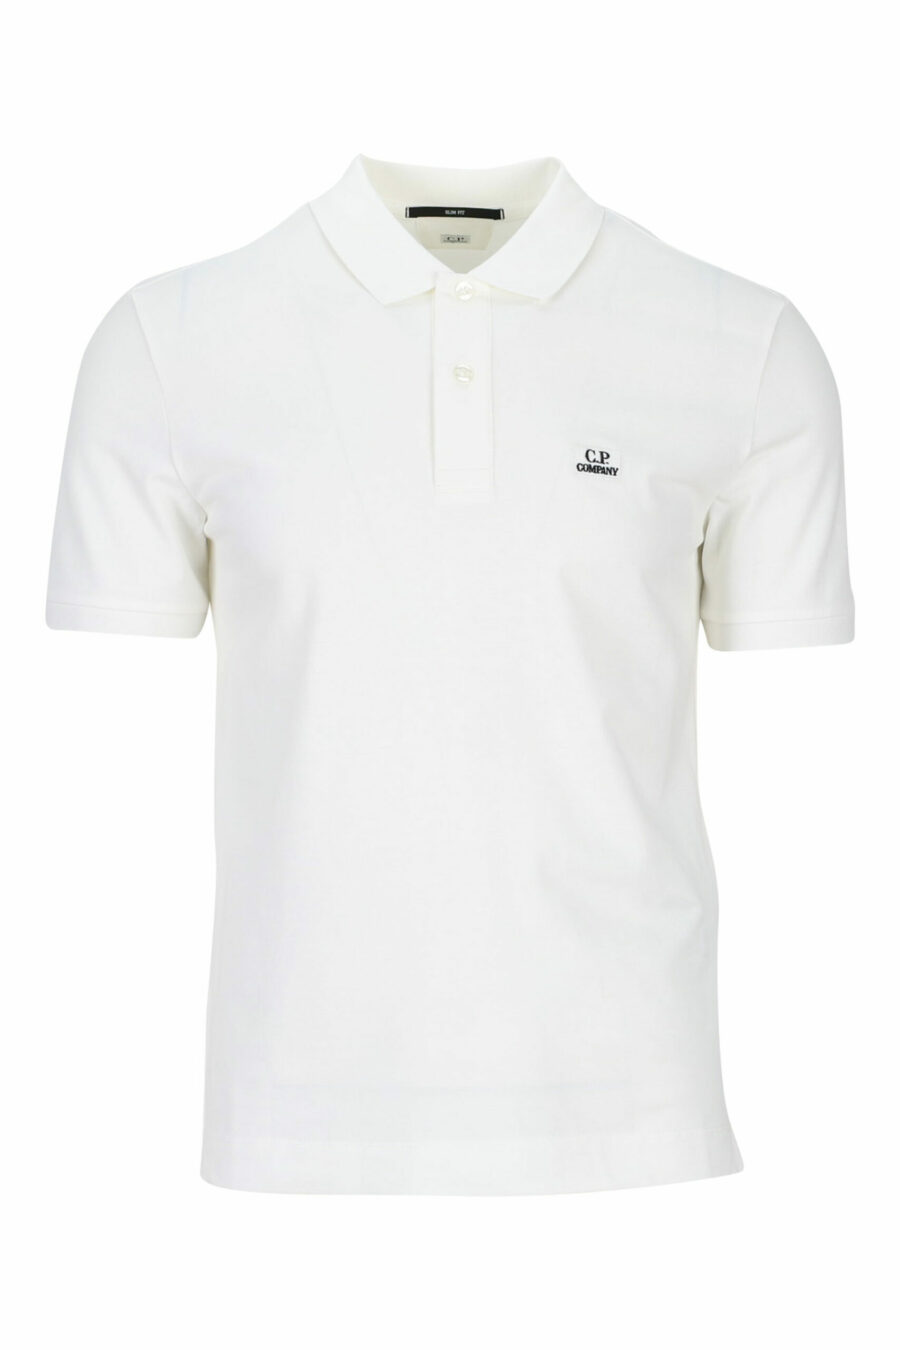 White polo shirt with mini logo patch - 7620943564679 scaled